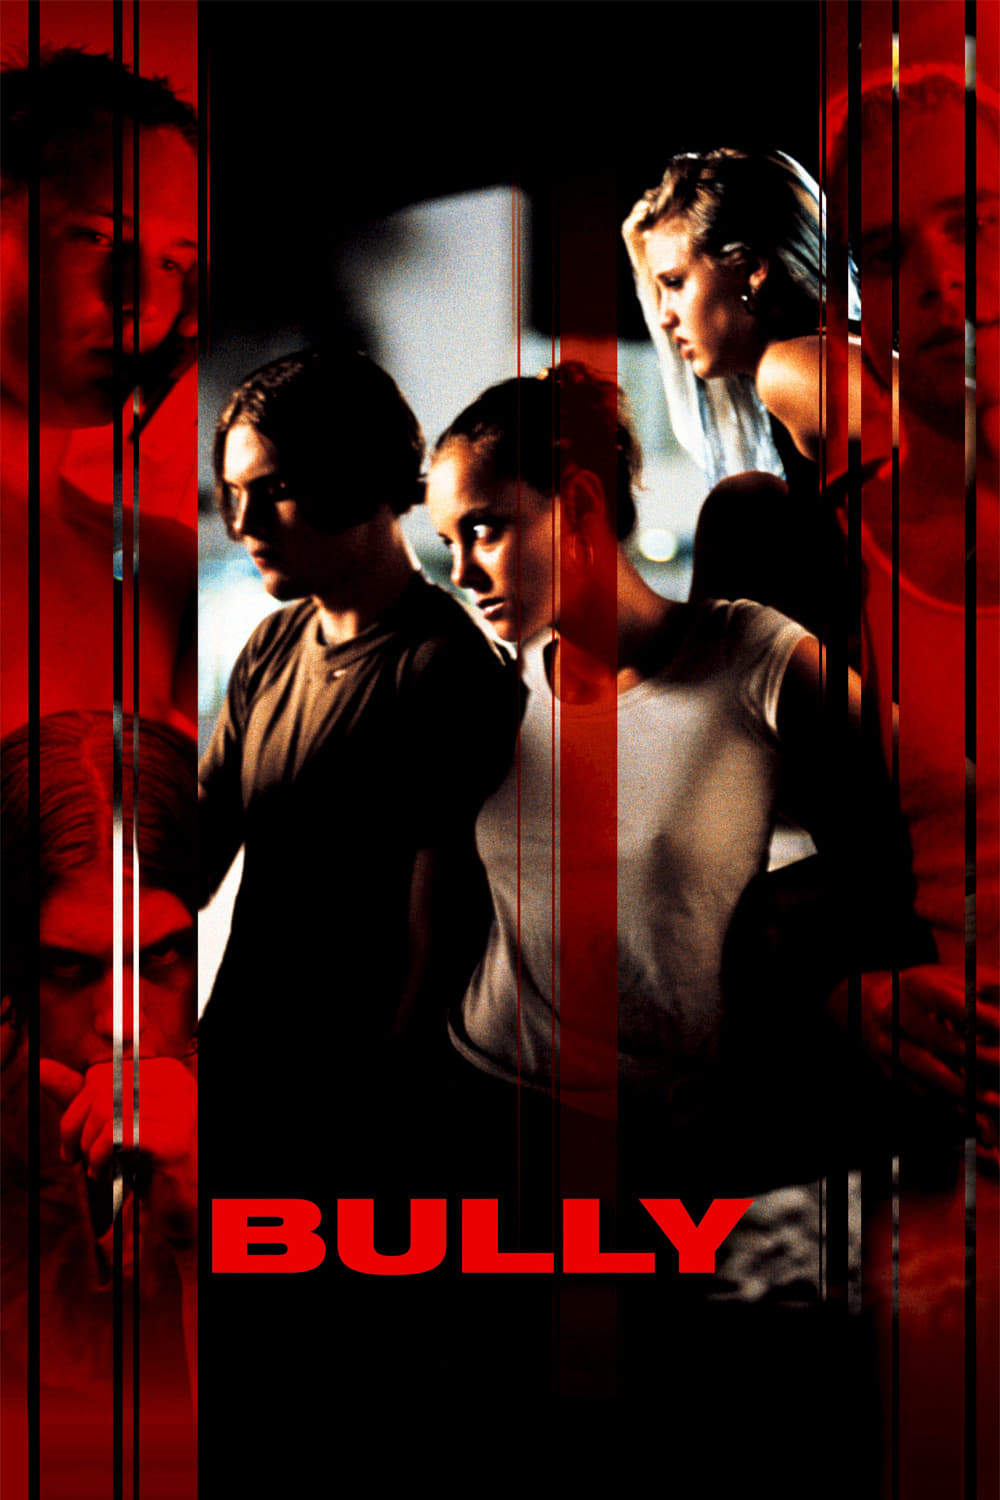 Poster for the movie "Bully"